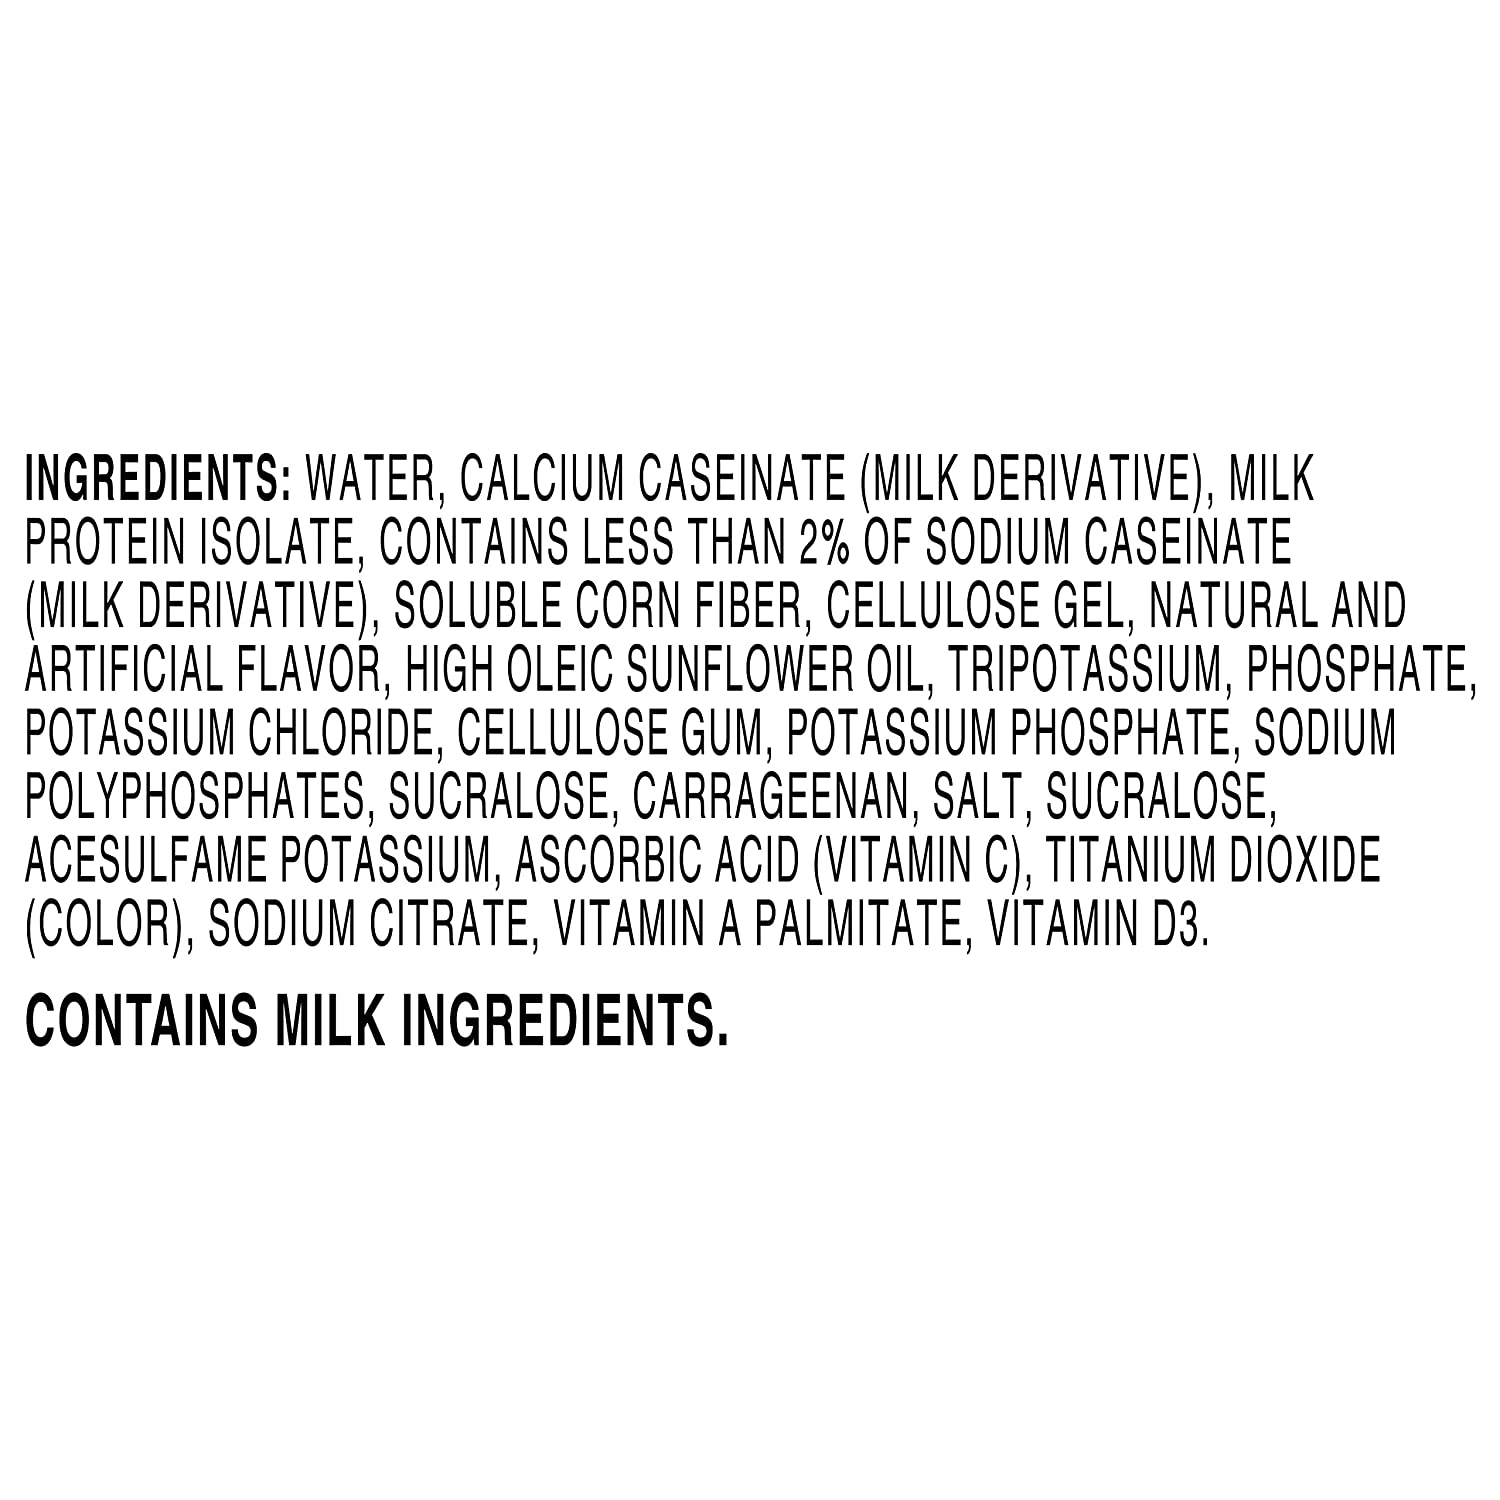 Muscle Milk Zero Protein Shake, Vanilla Crème, 11.16 Fl Oz Bottle, 12 Pack, 20G Protein, Zero Sugar, 100 Calories, Calcium, Vitamins A, C & D, 4G Fiber, Energizing Snack, Workout Recovery, Packaging May Vary